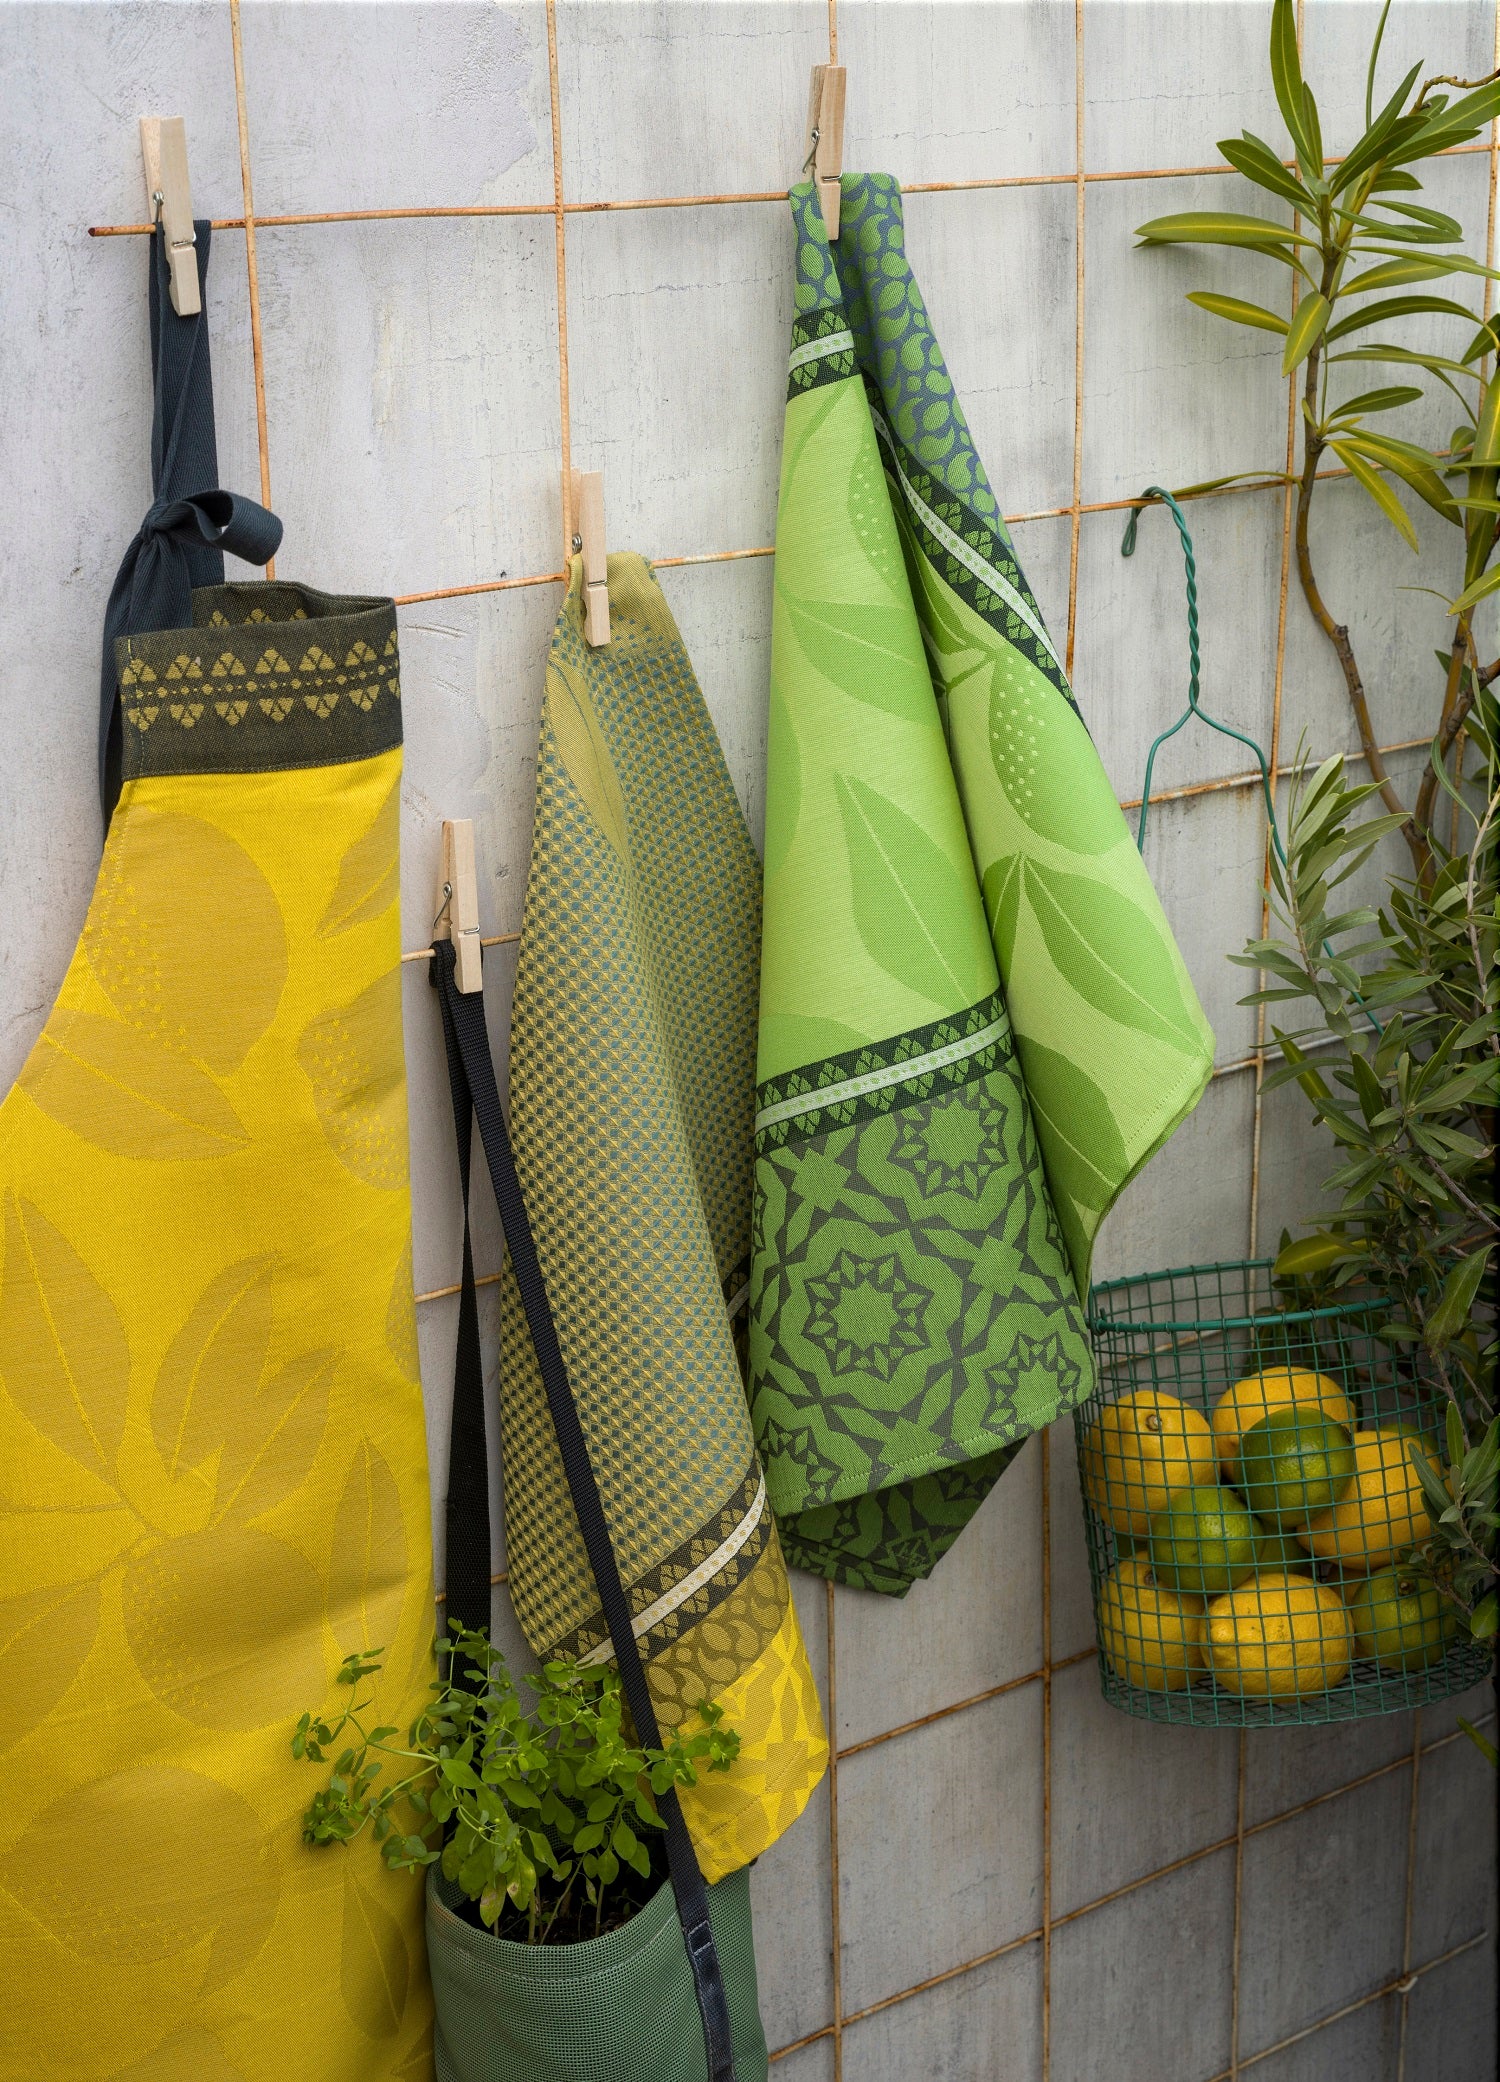 Jacquard Francais "Sous les Citronniers" (Green), Woven cotton hand towel. Made in France.